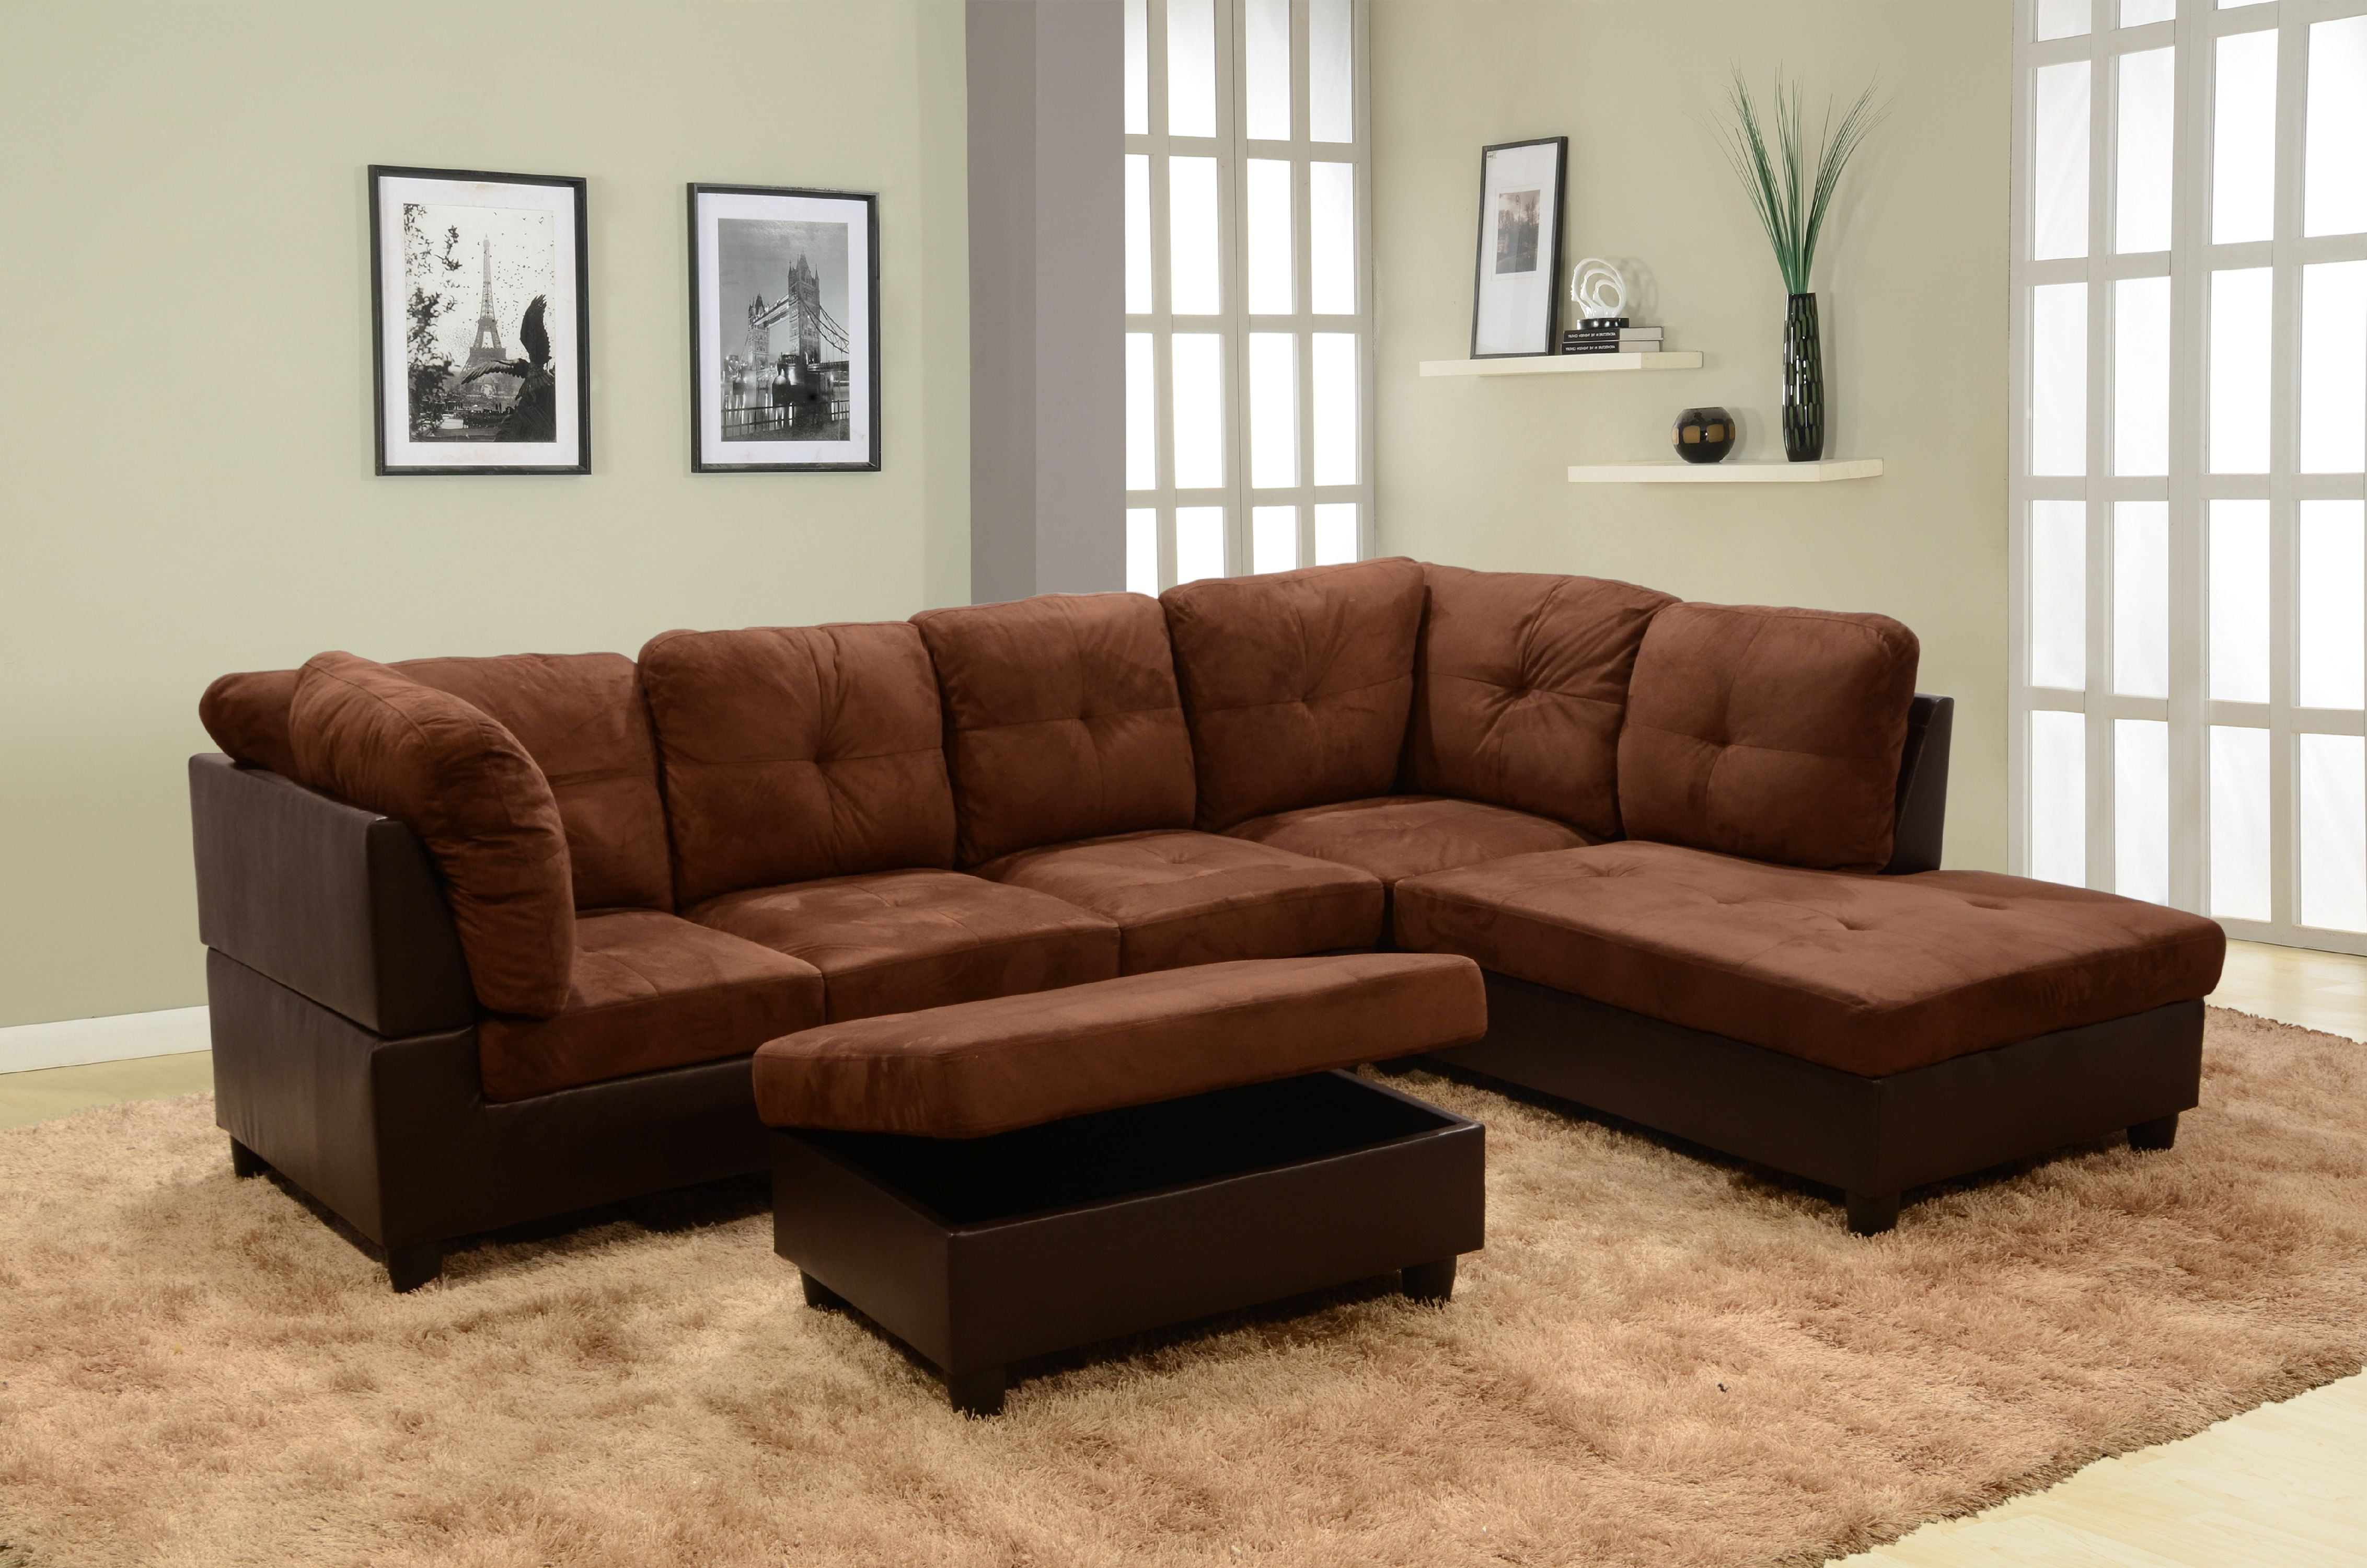 ottoman that matches with brown leather sofa